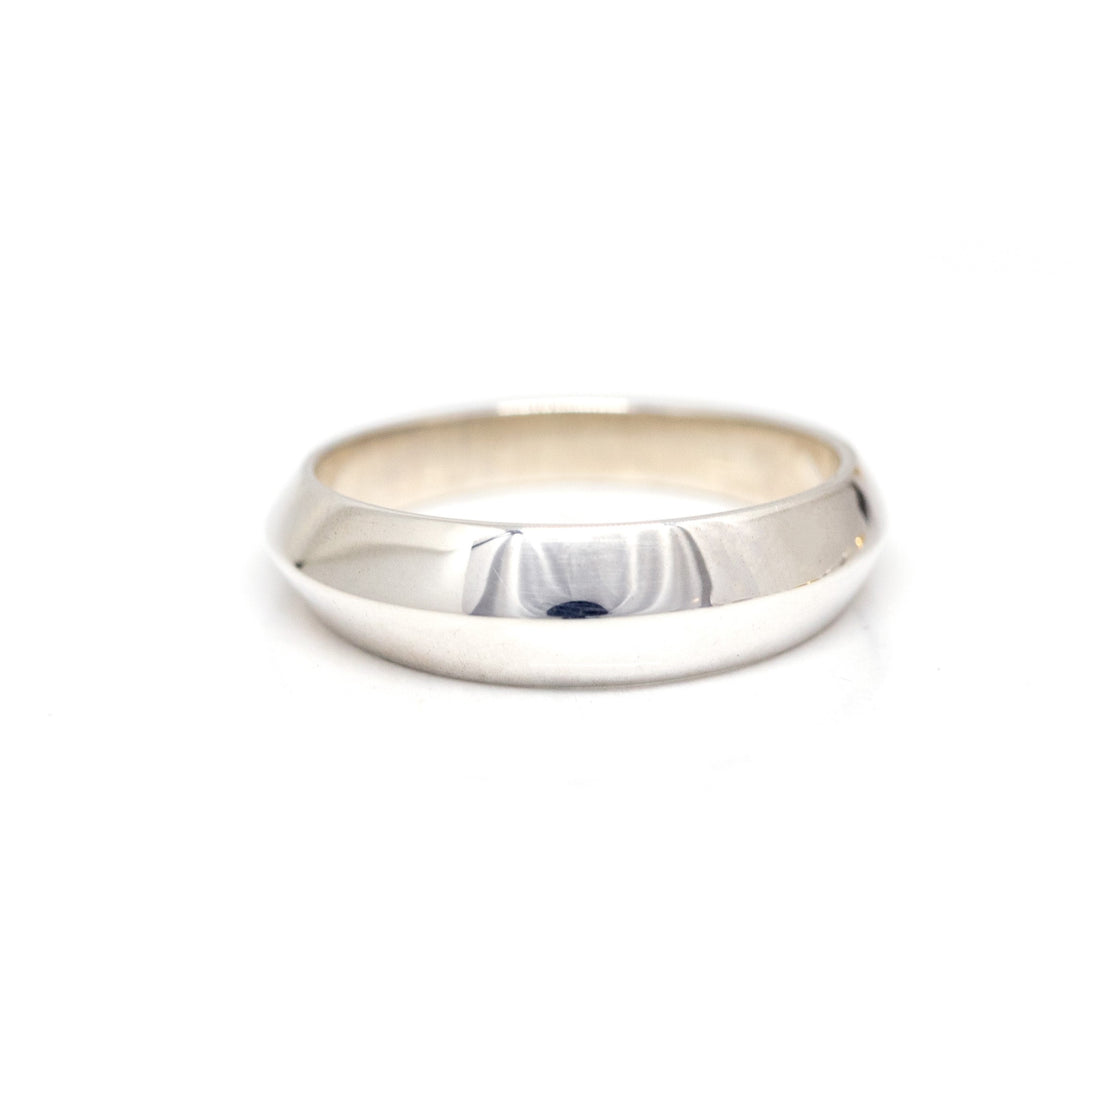 white gold men engagement ring custom wedding band in montreal by bena jewelry designer on a white background